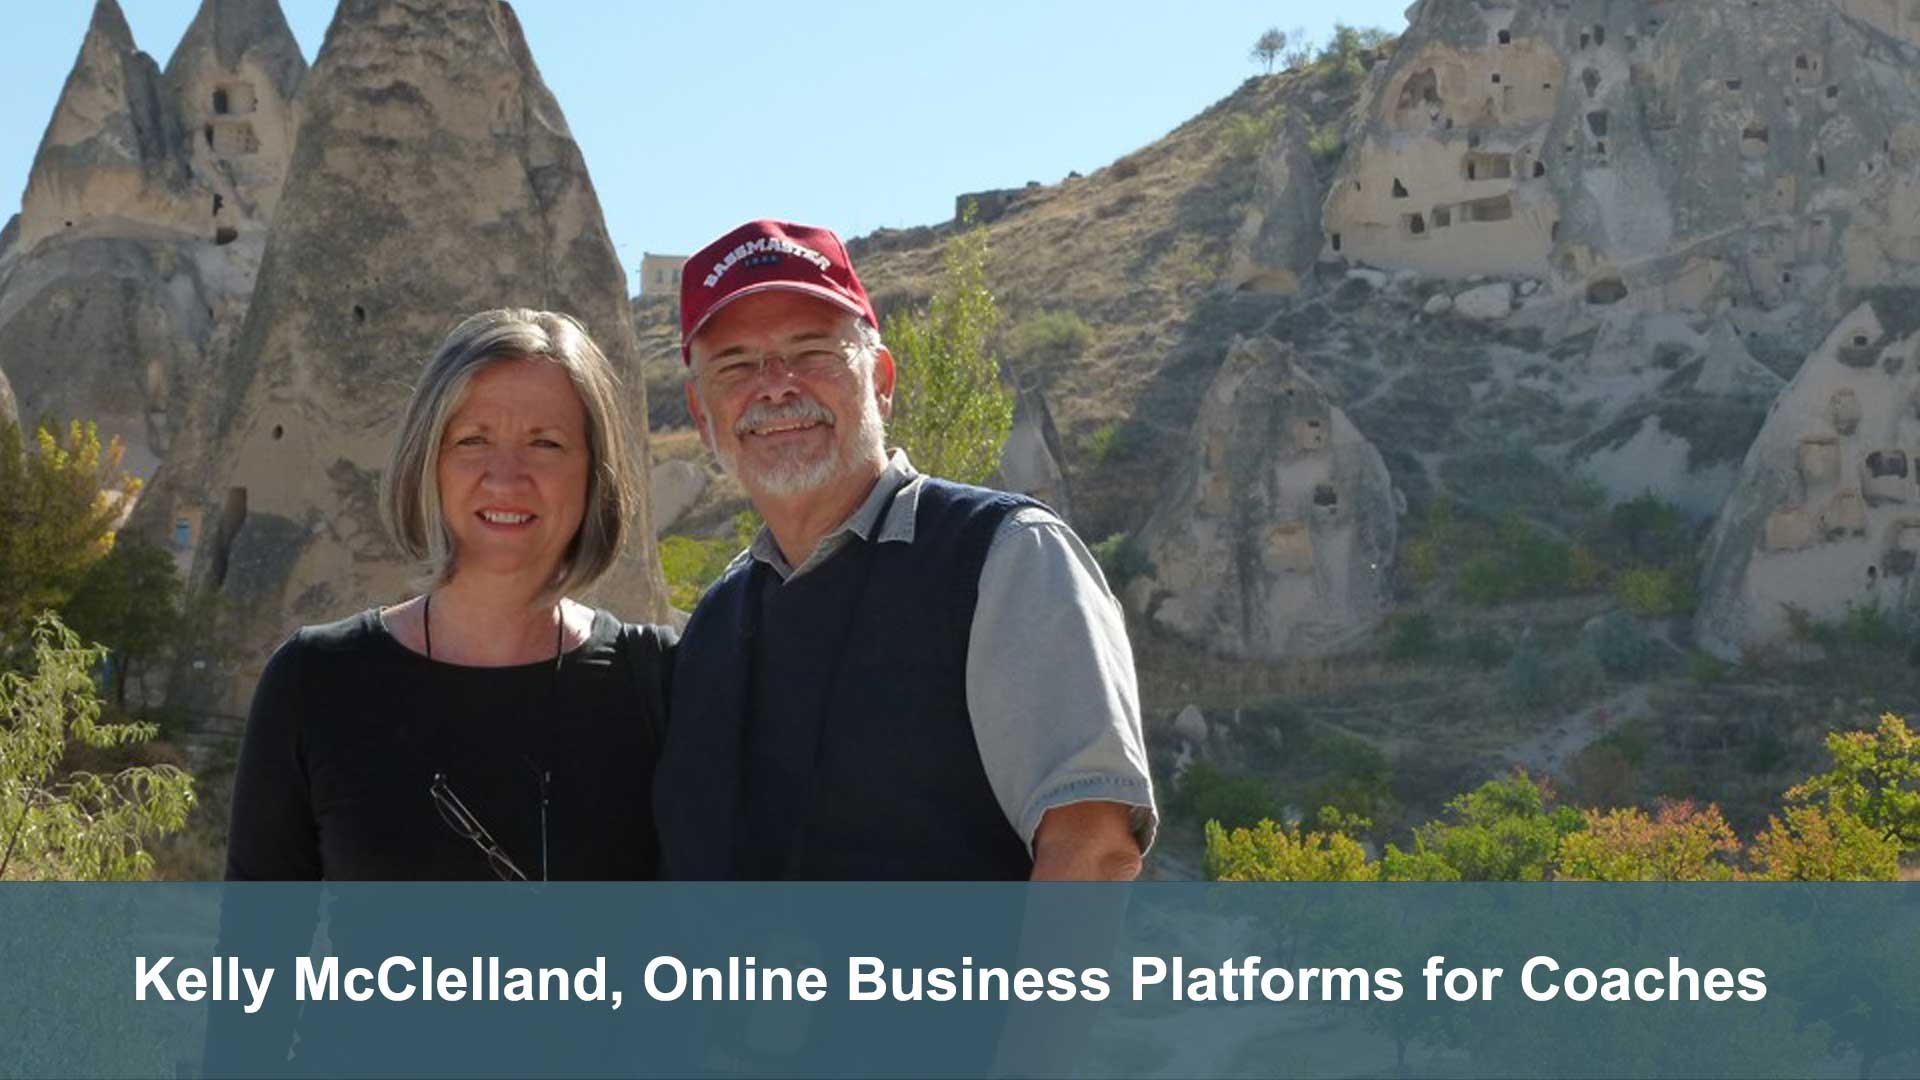 Online Business Platforms for Coaches – Interview with Kelly McClelland